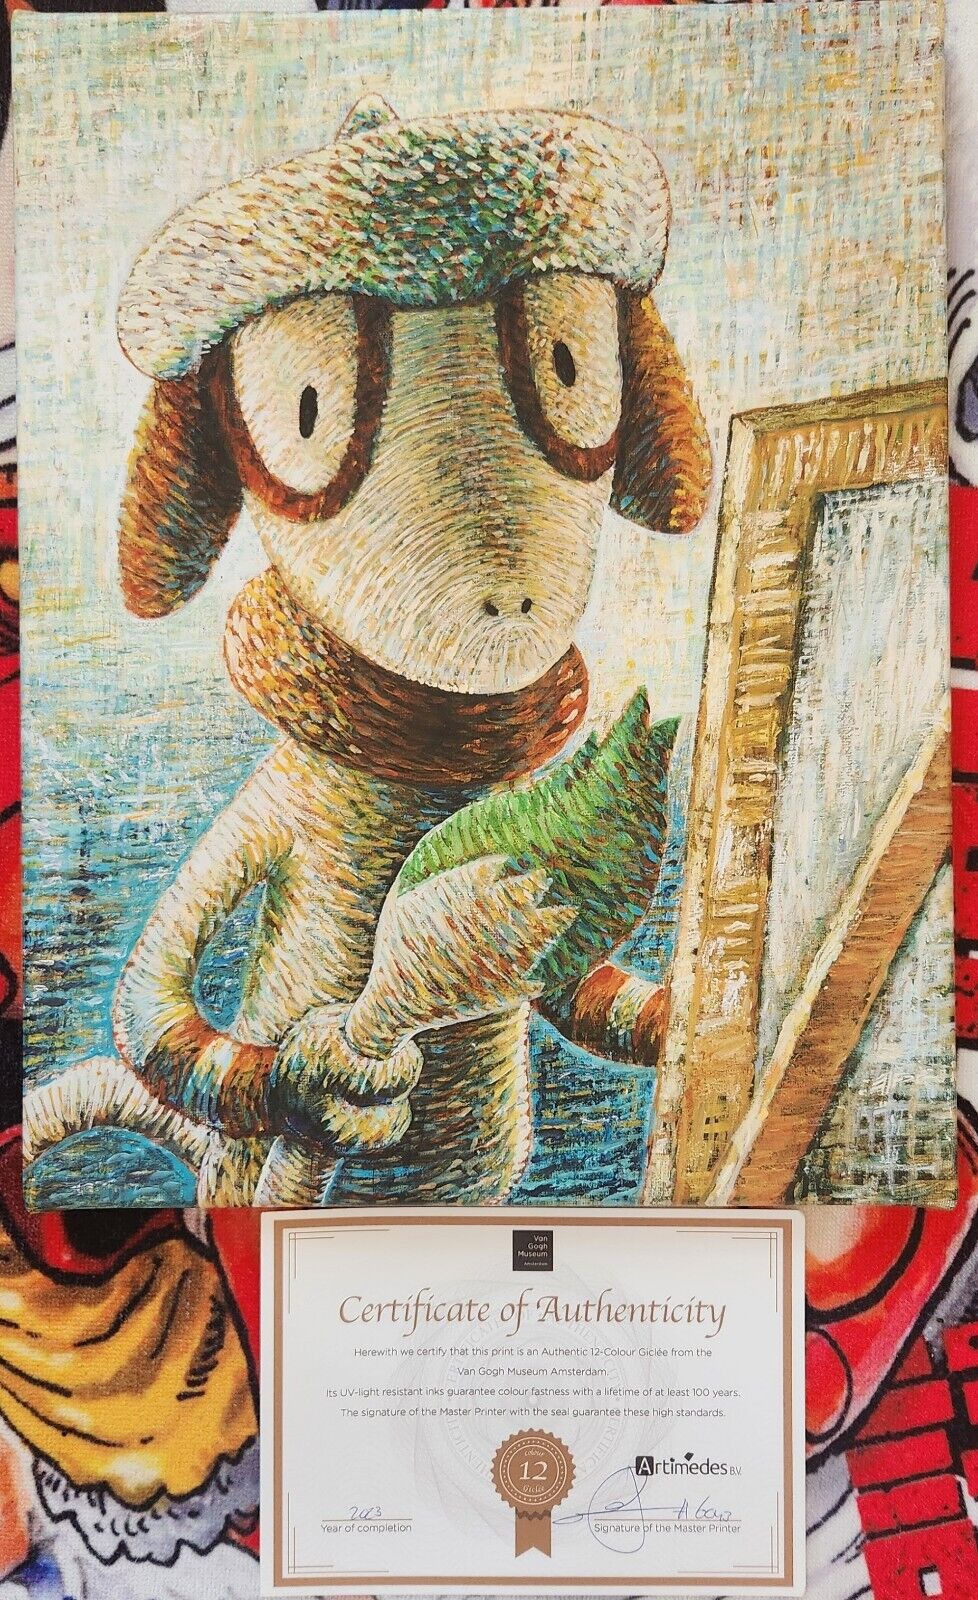 Pokemon Center x Van Gogh Museum Official Smeargle Canvas 45x35in Giclee + COA